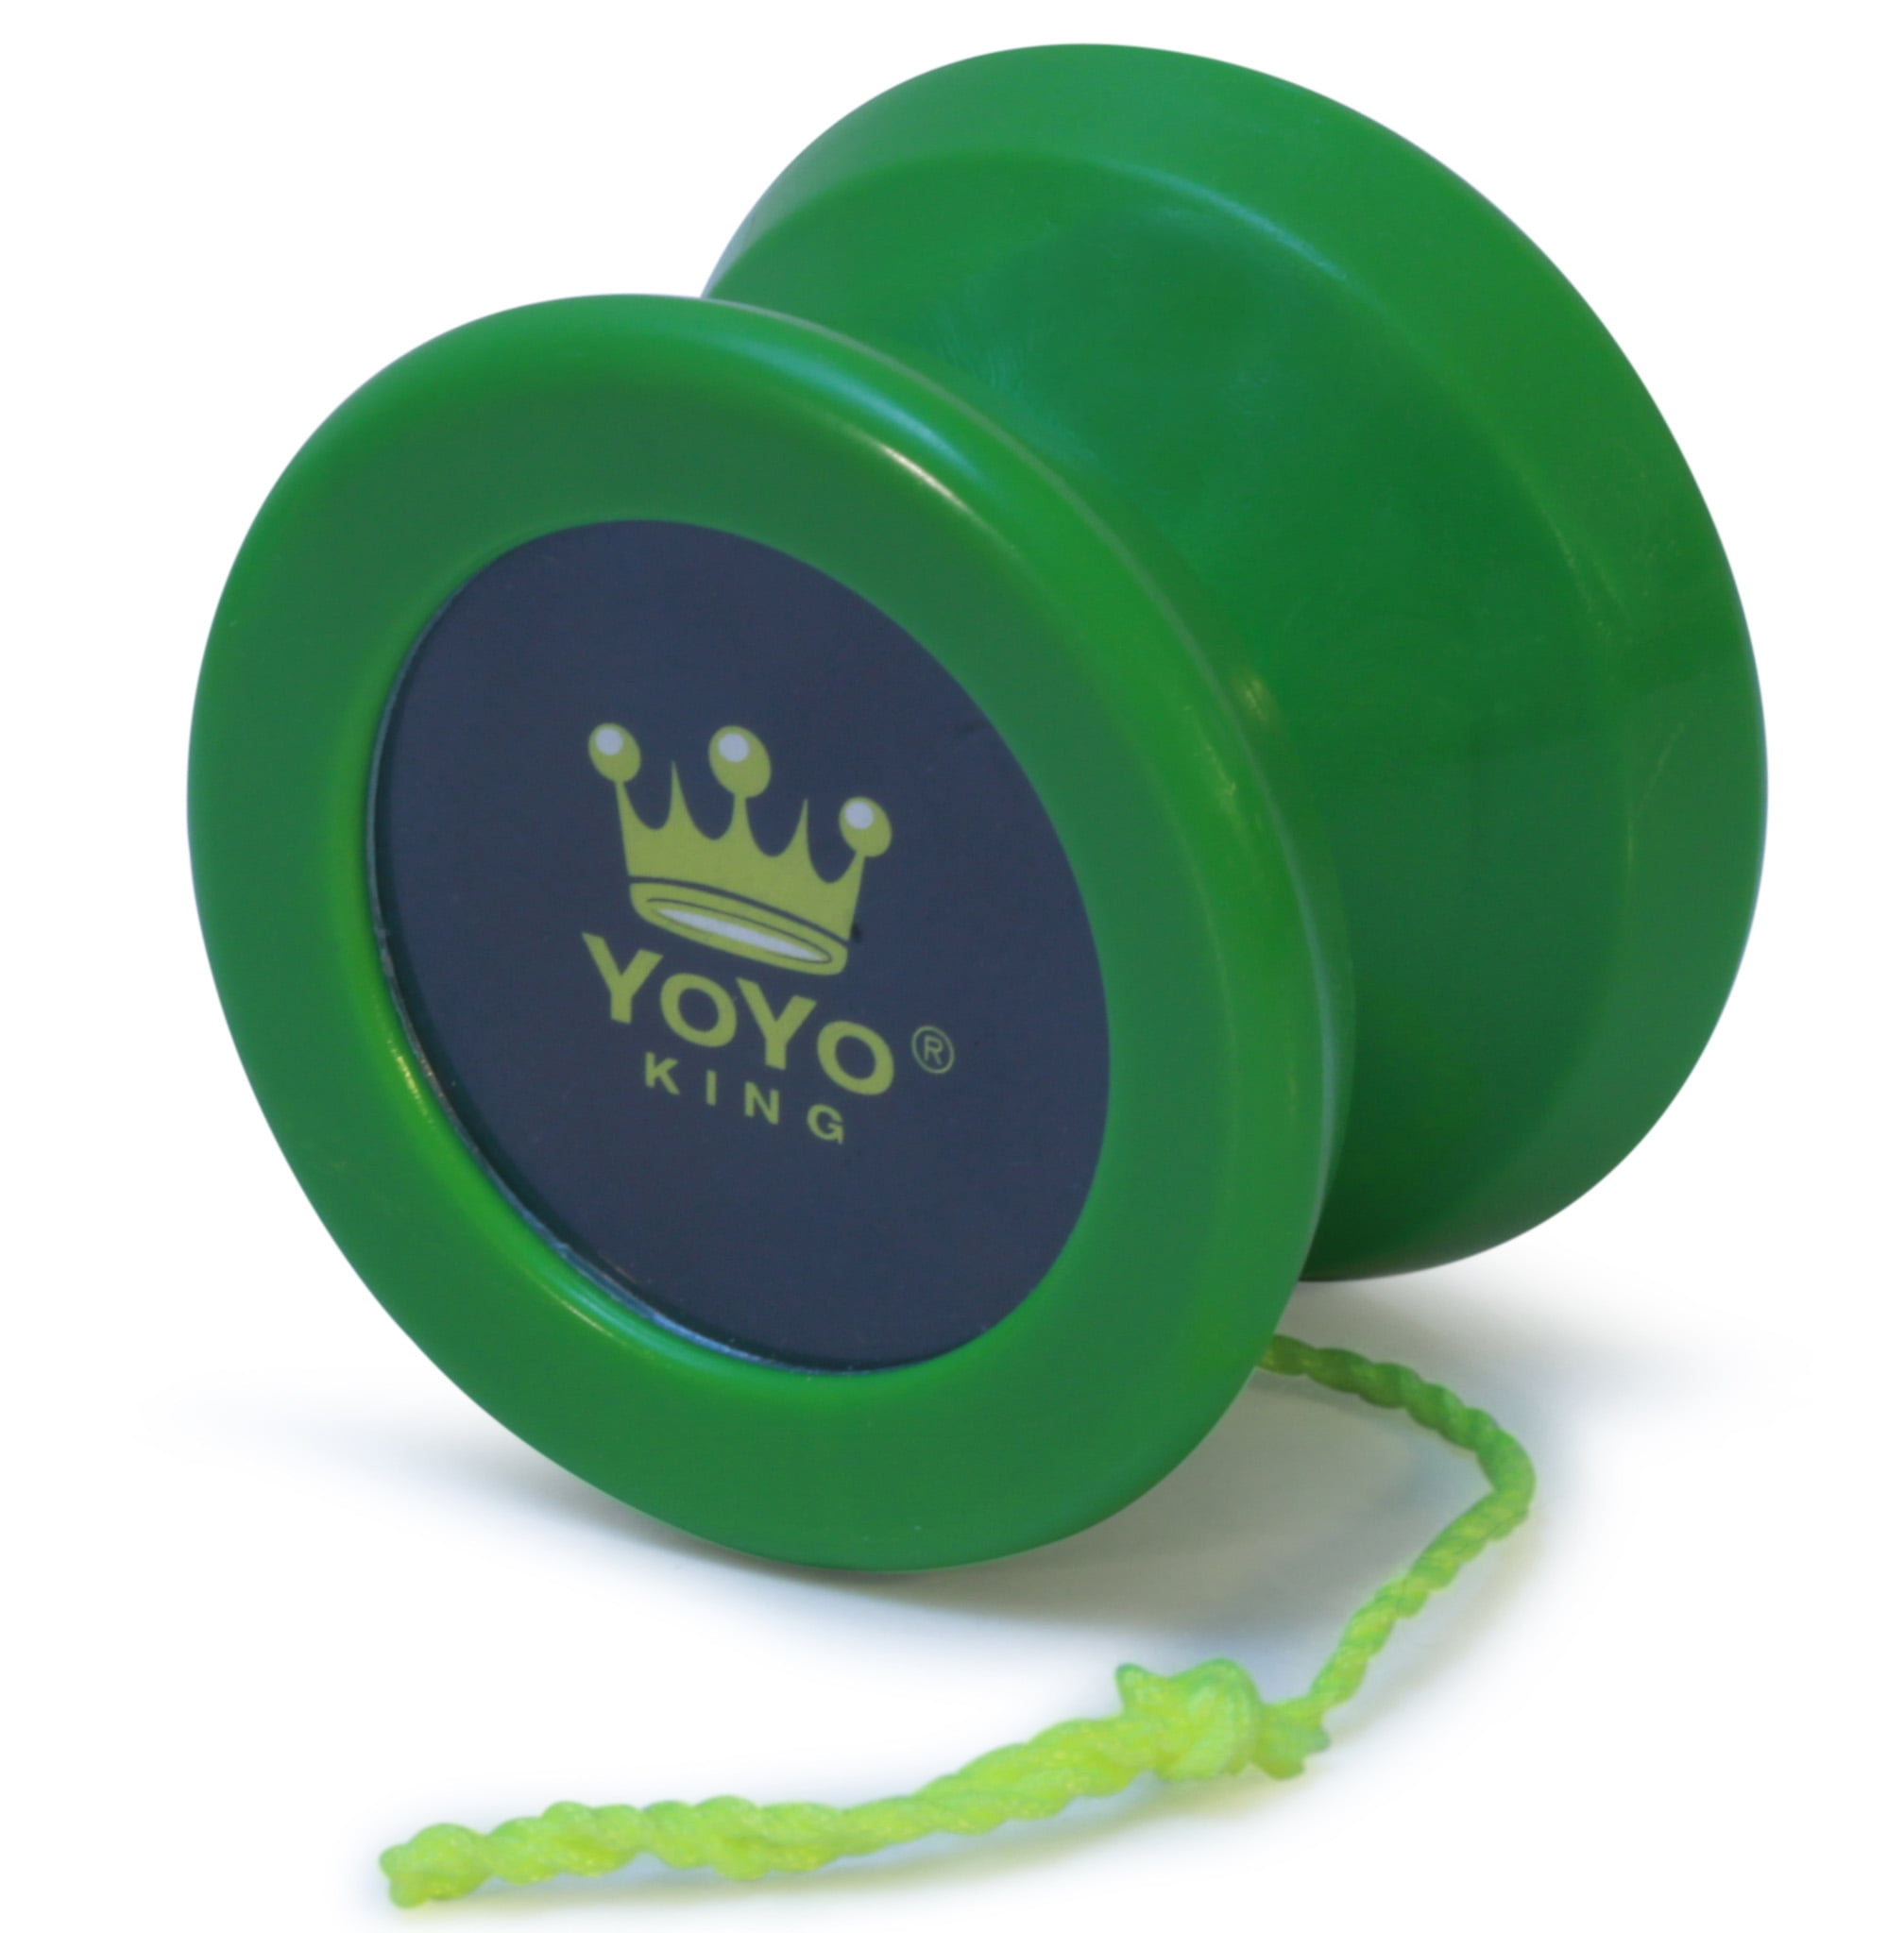 King Green Merlin Professional Responsive Trick Yoyo for Pros With Narrow C for sale online 